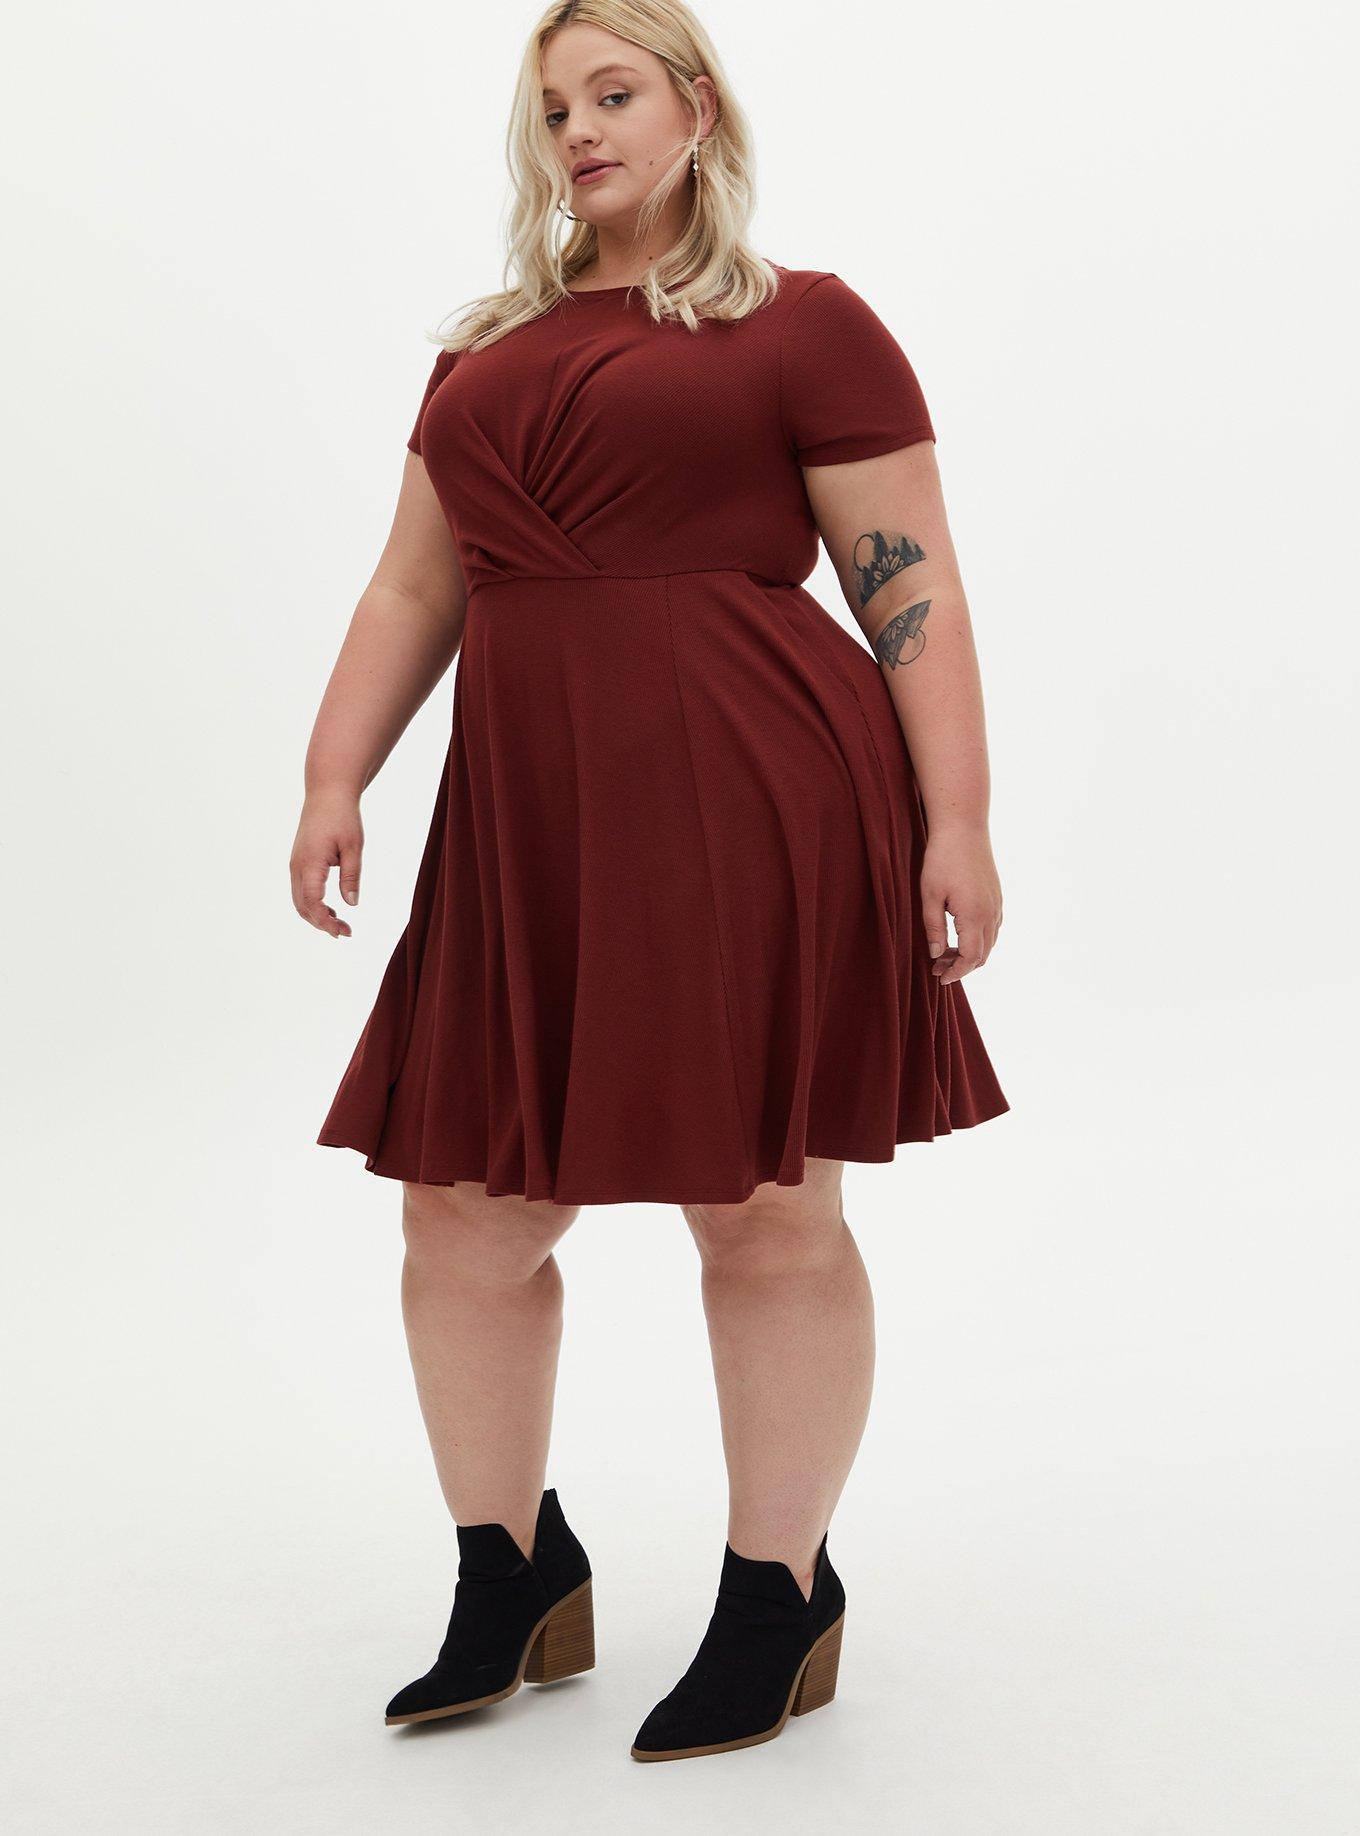 New Torrid dress! This is one of three that I received this week. I love it  to much! : r/PlusSizeFashion